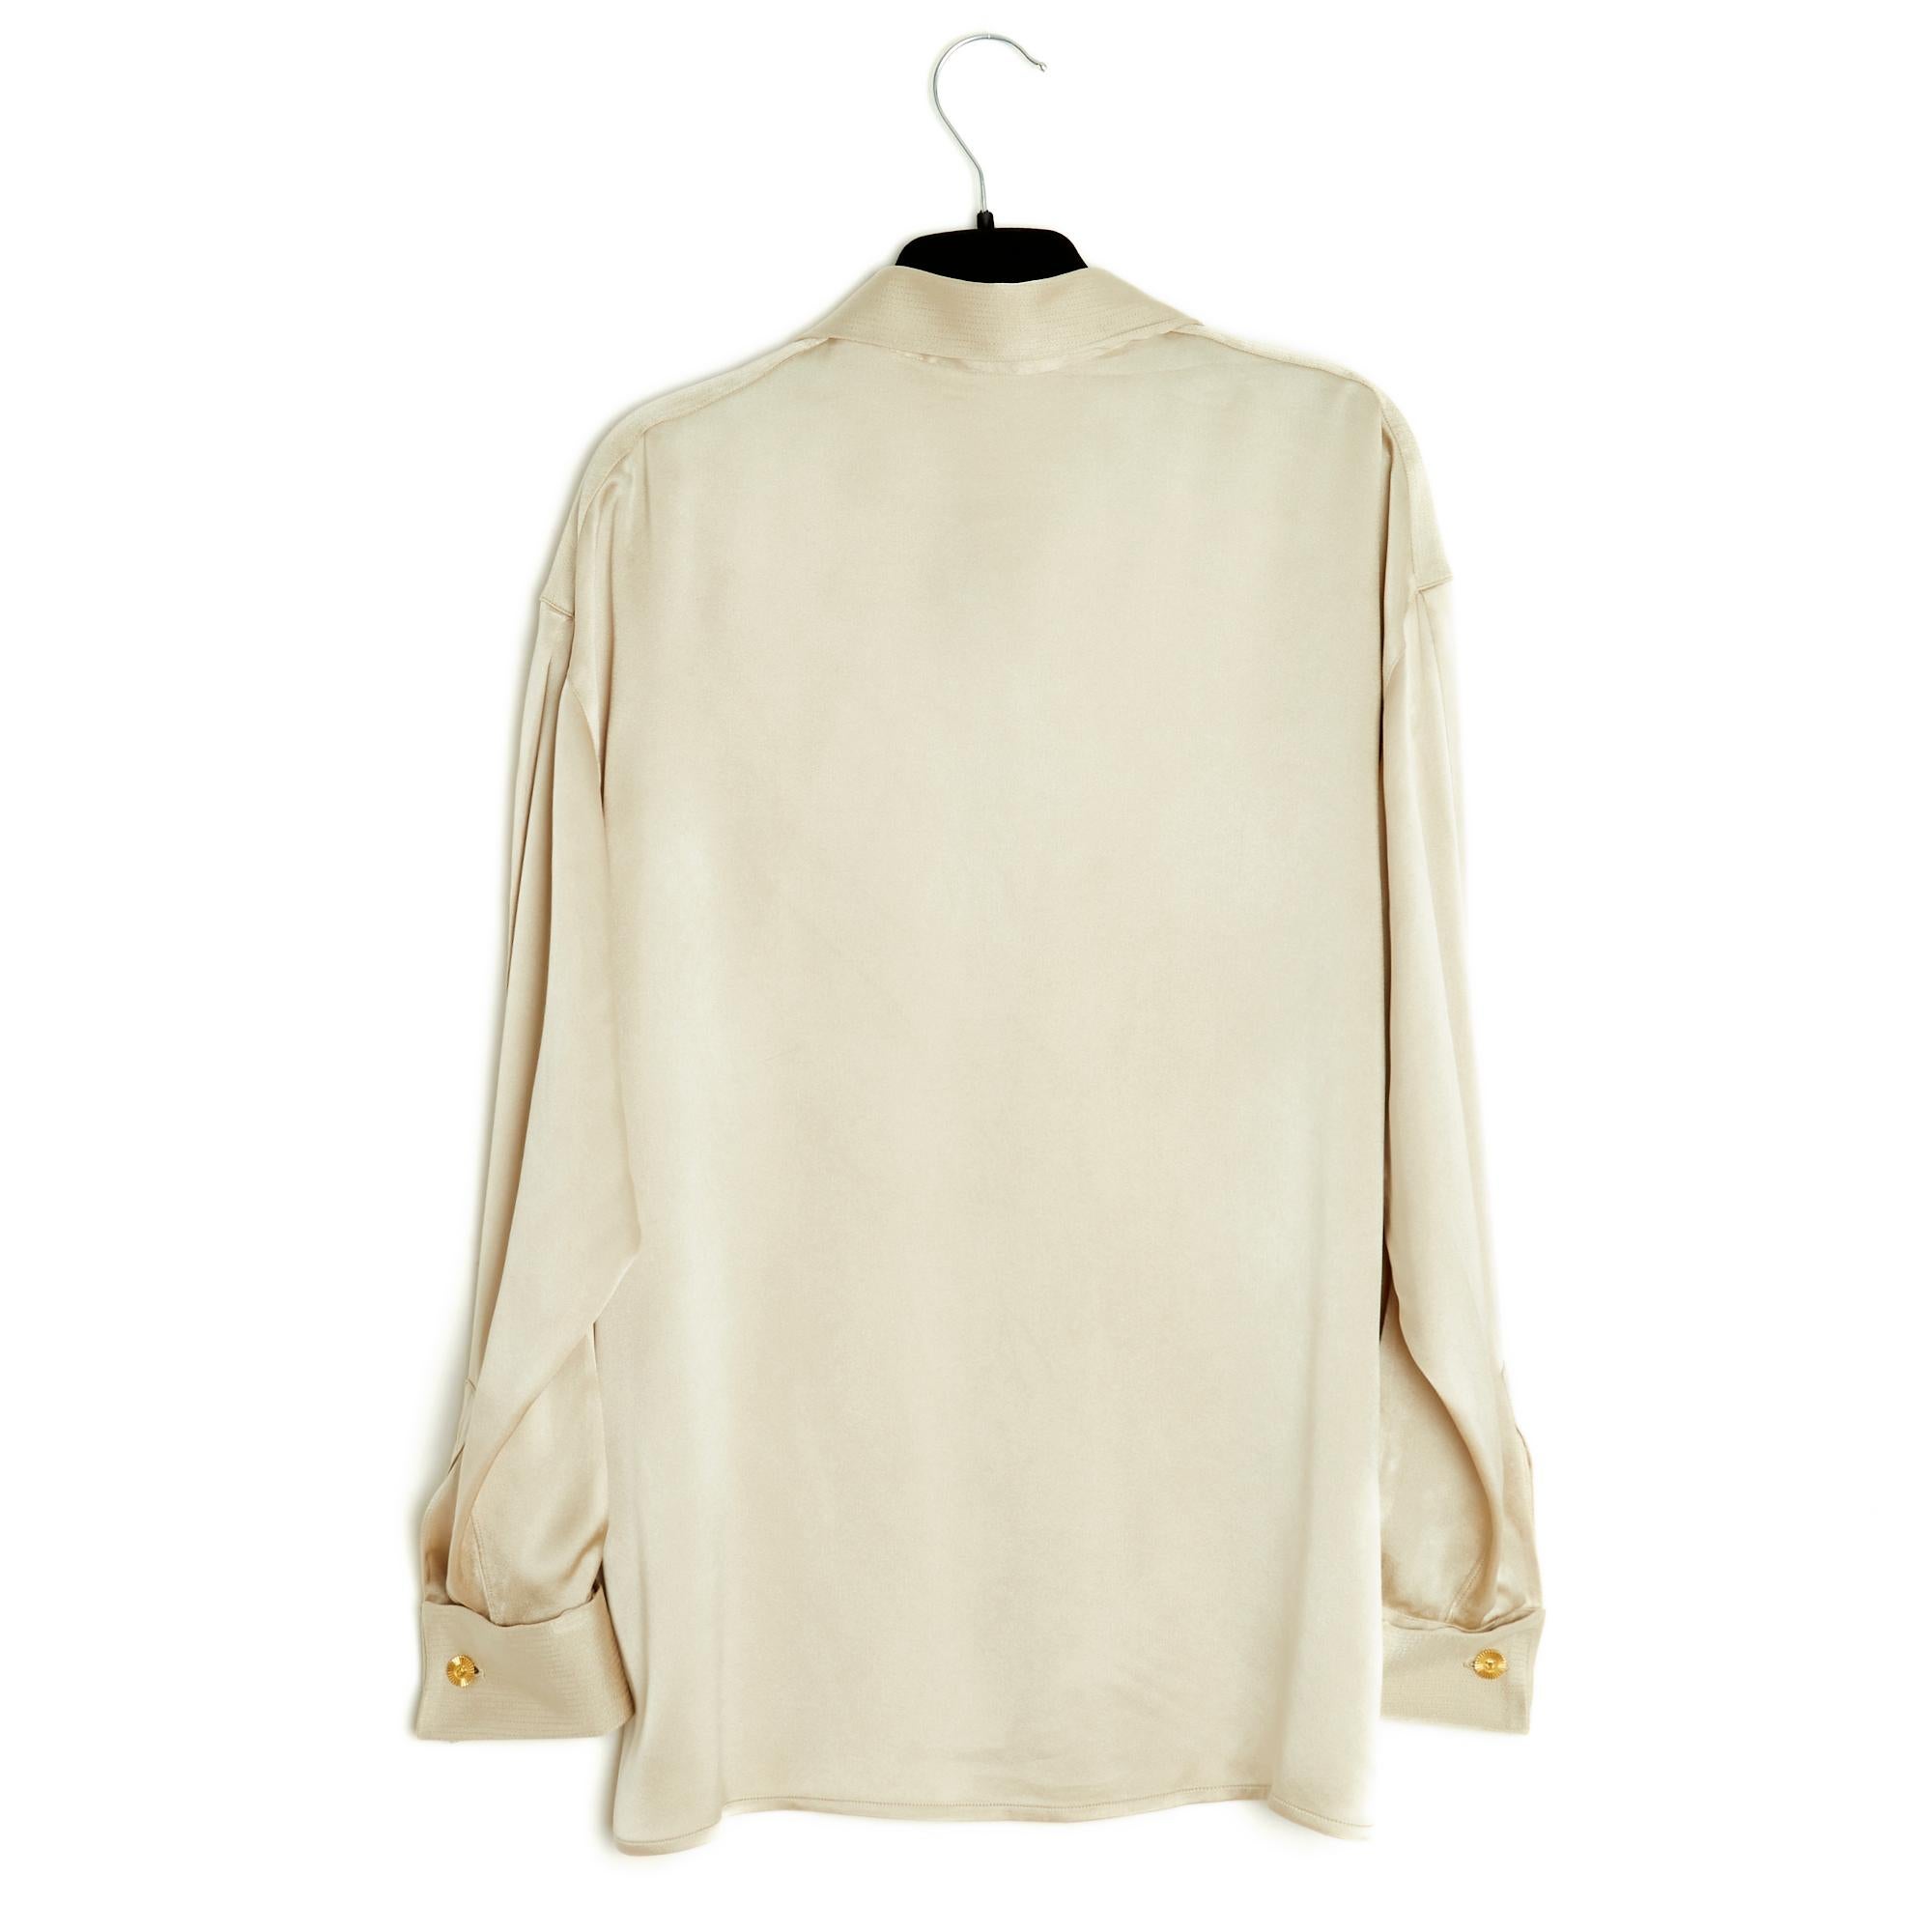 SS95 Chanel Top Blouse Champagne silk FR38 3